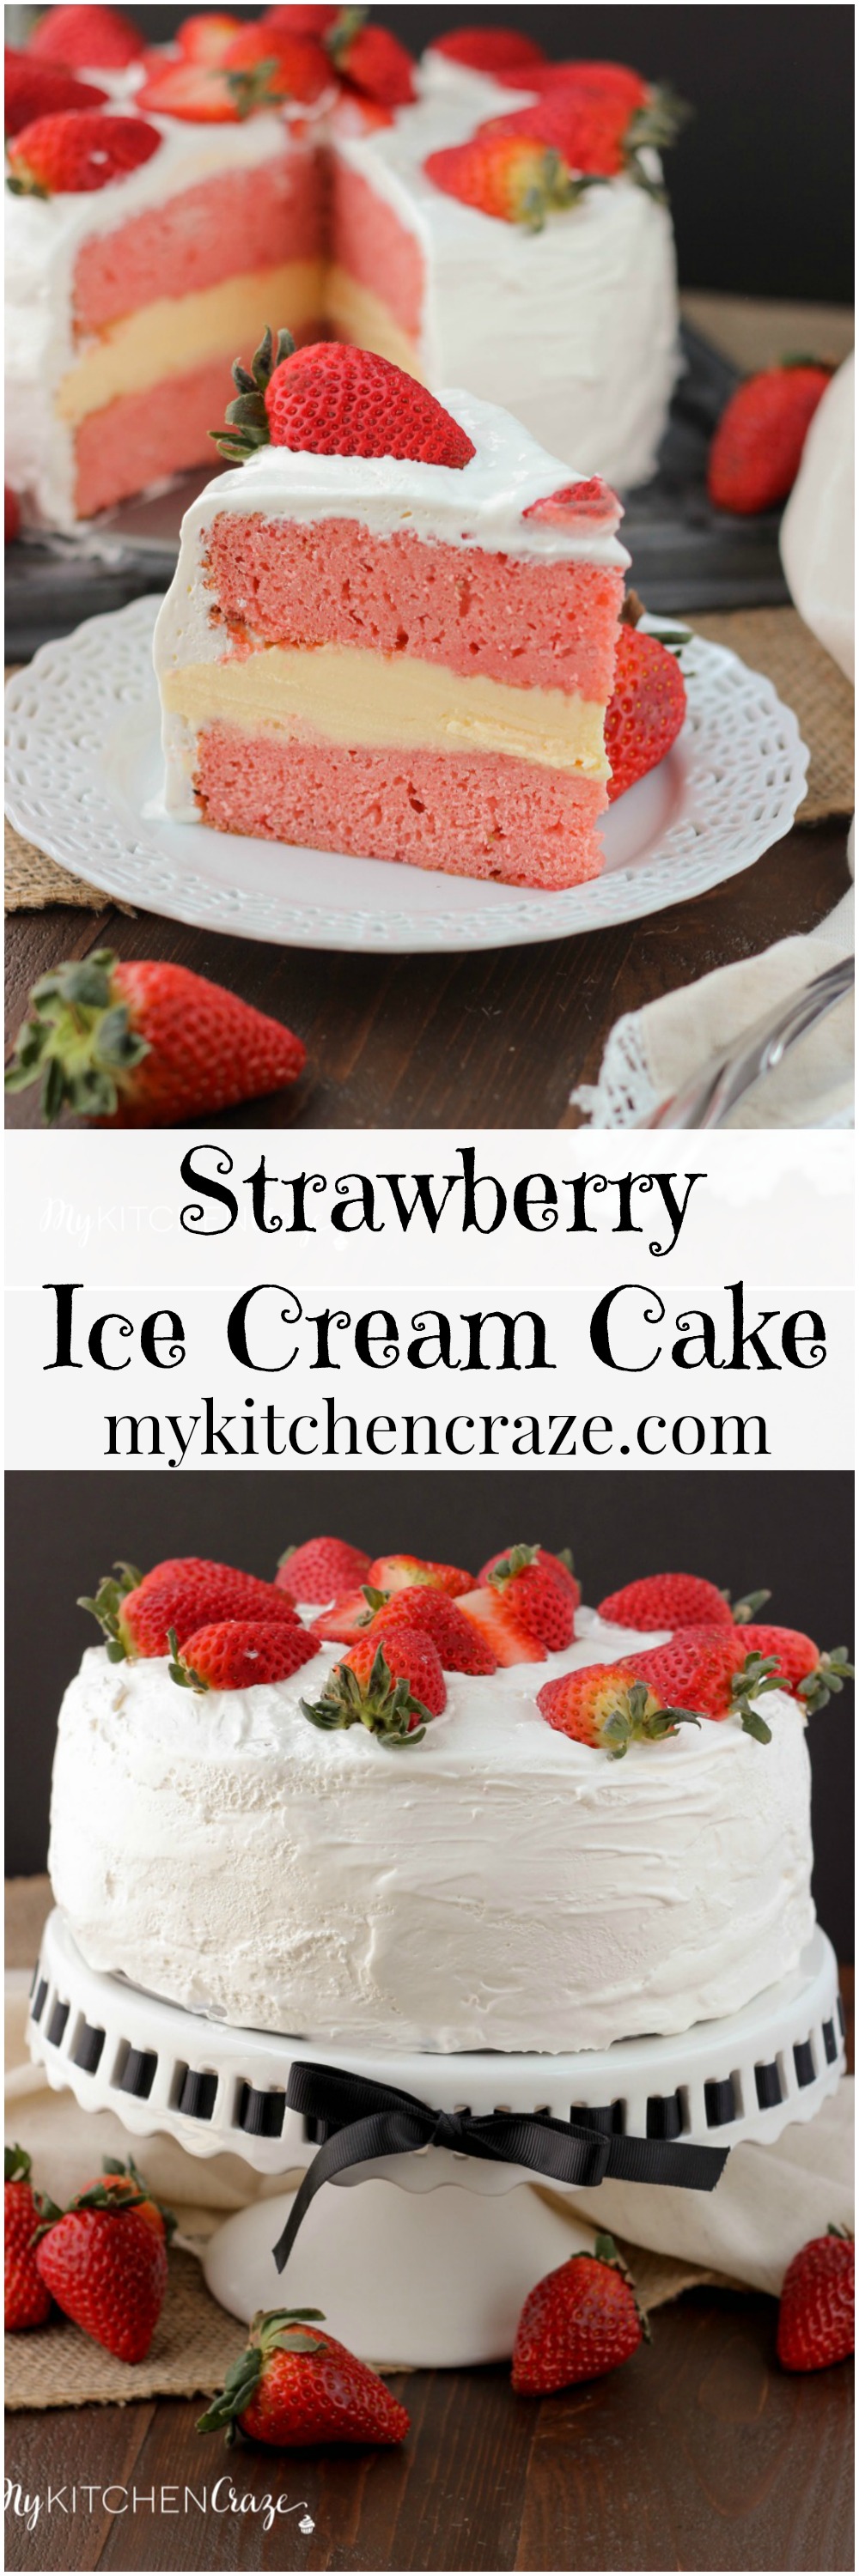 PinterestStrawberry Ice Cream Cake ~ mykitchencraze.com ~ Make your own delicious ice cream cake right in the comfort of your own home. Homemade strawberry cake layered with vanilla ice cream. All in one yummy bite.